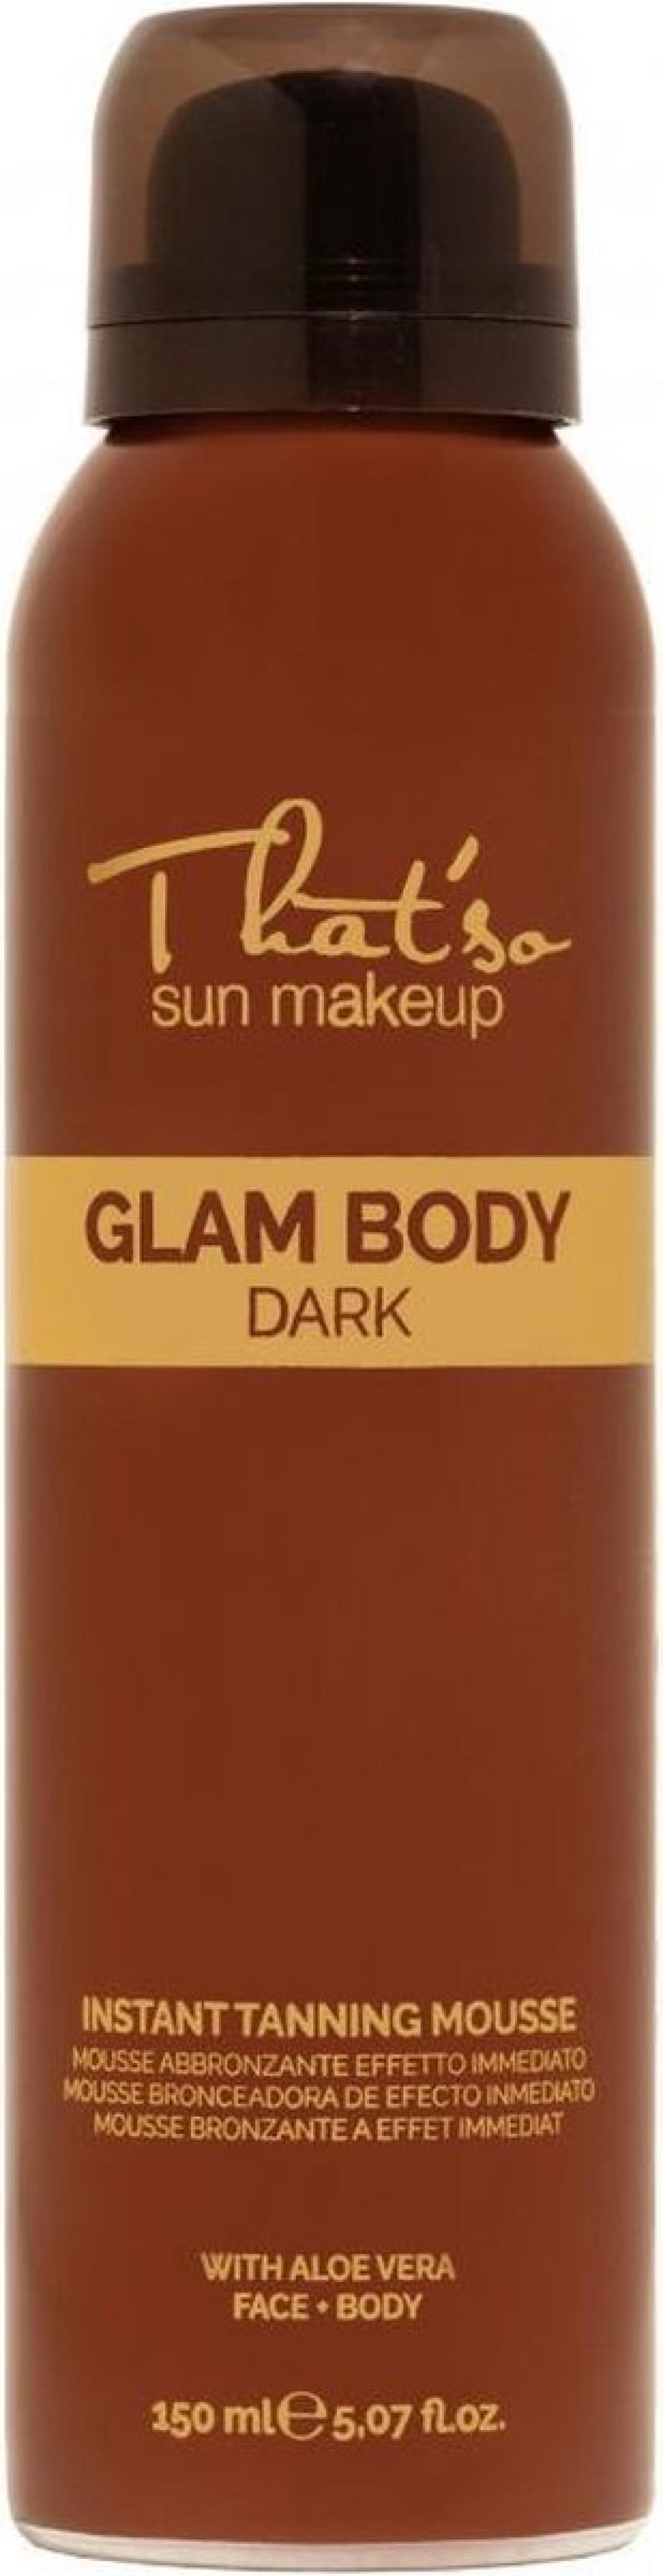 Glam body mousse